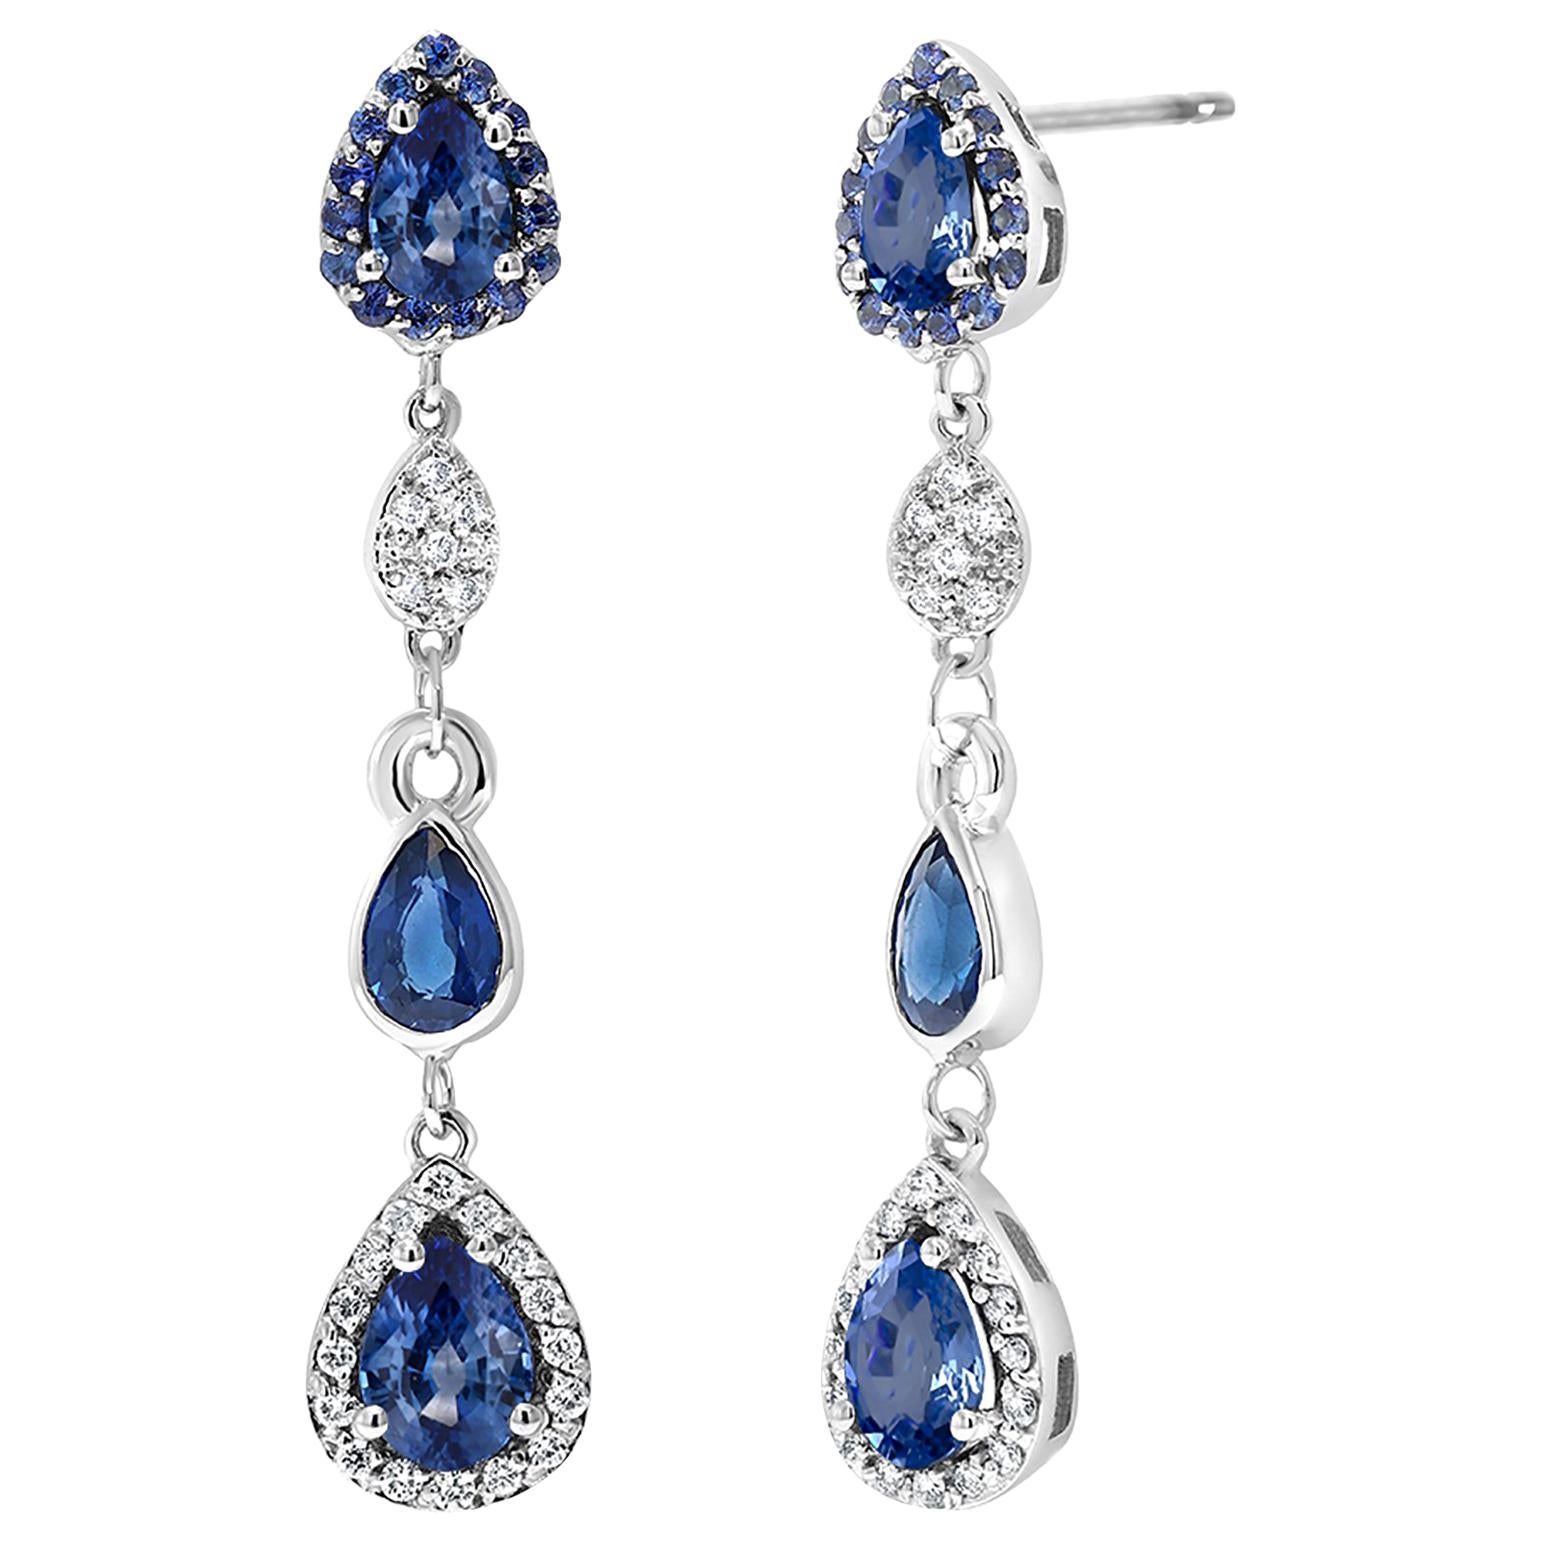 Diamond Earrings with Pear Shape Sapphire Drops Weighing 4.90 Carat